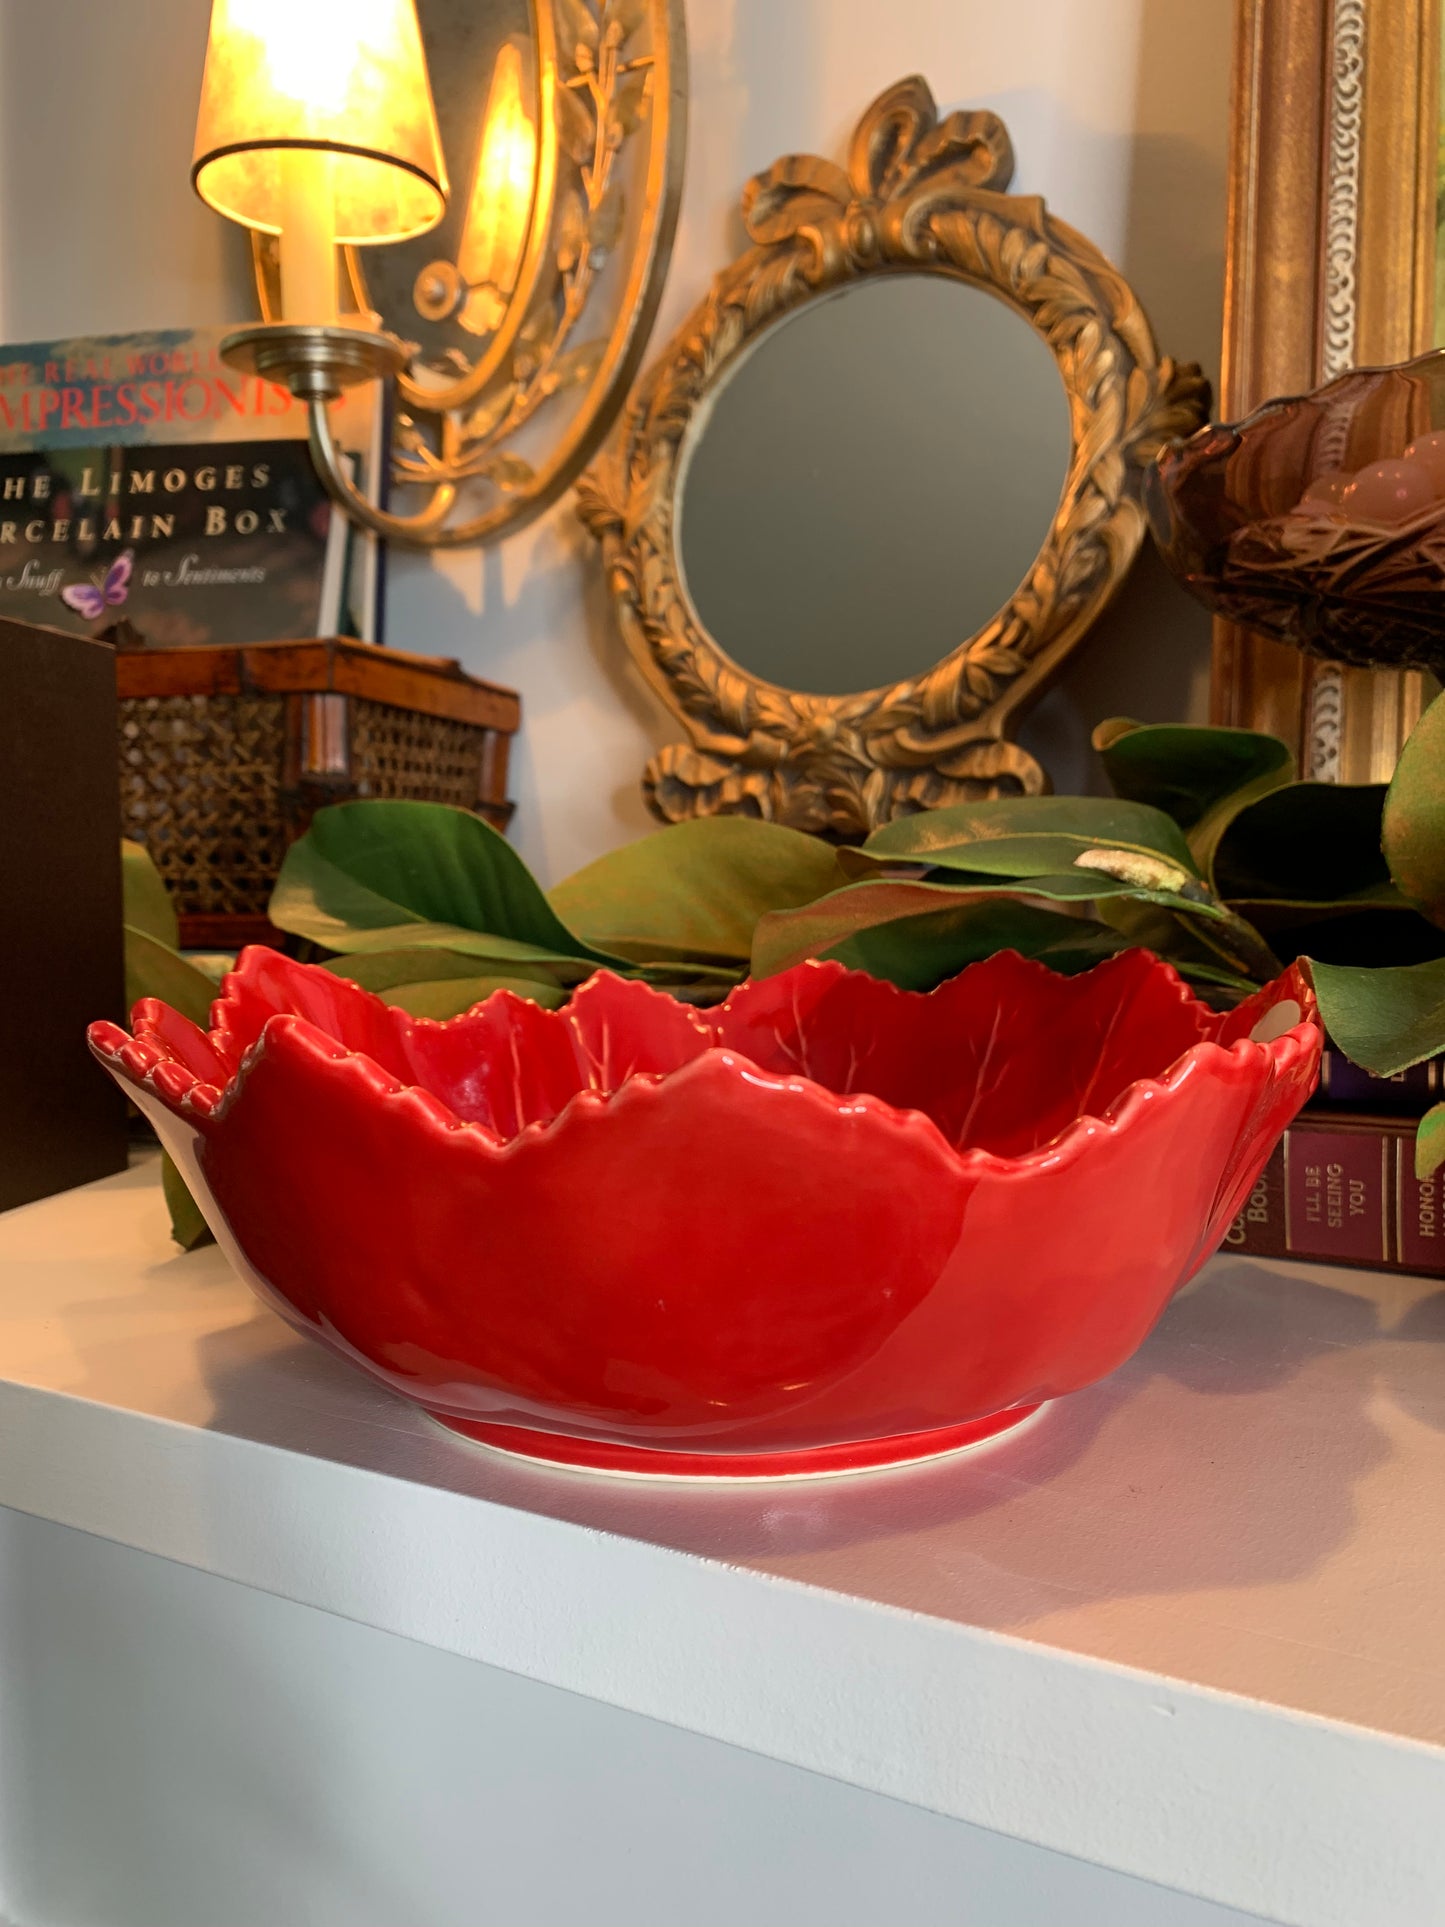 New Red Maple Leaf Olfaire Serving Bowl